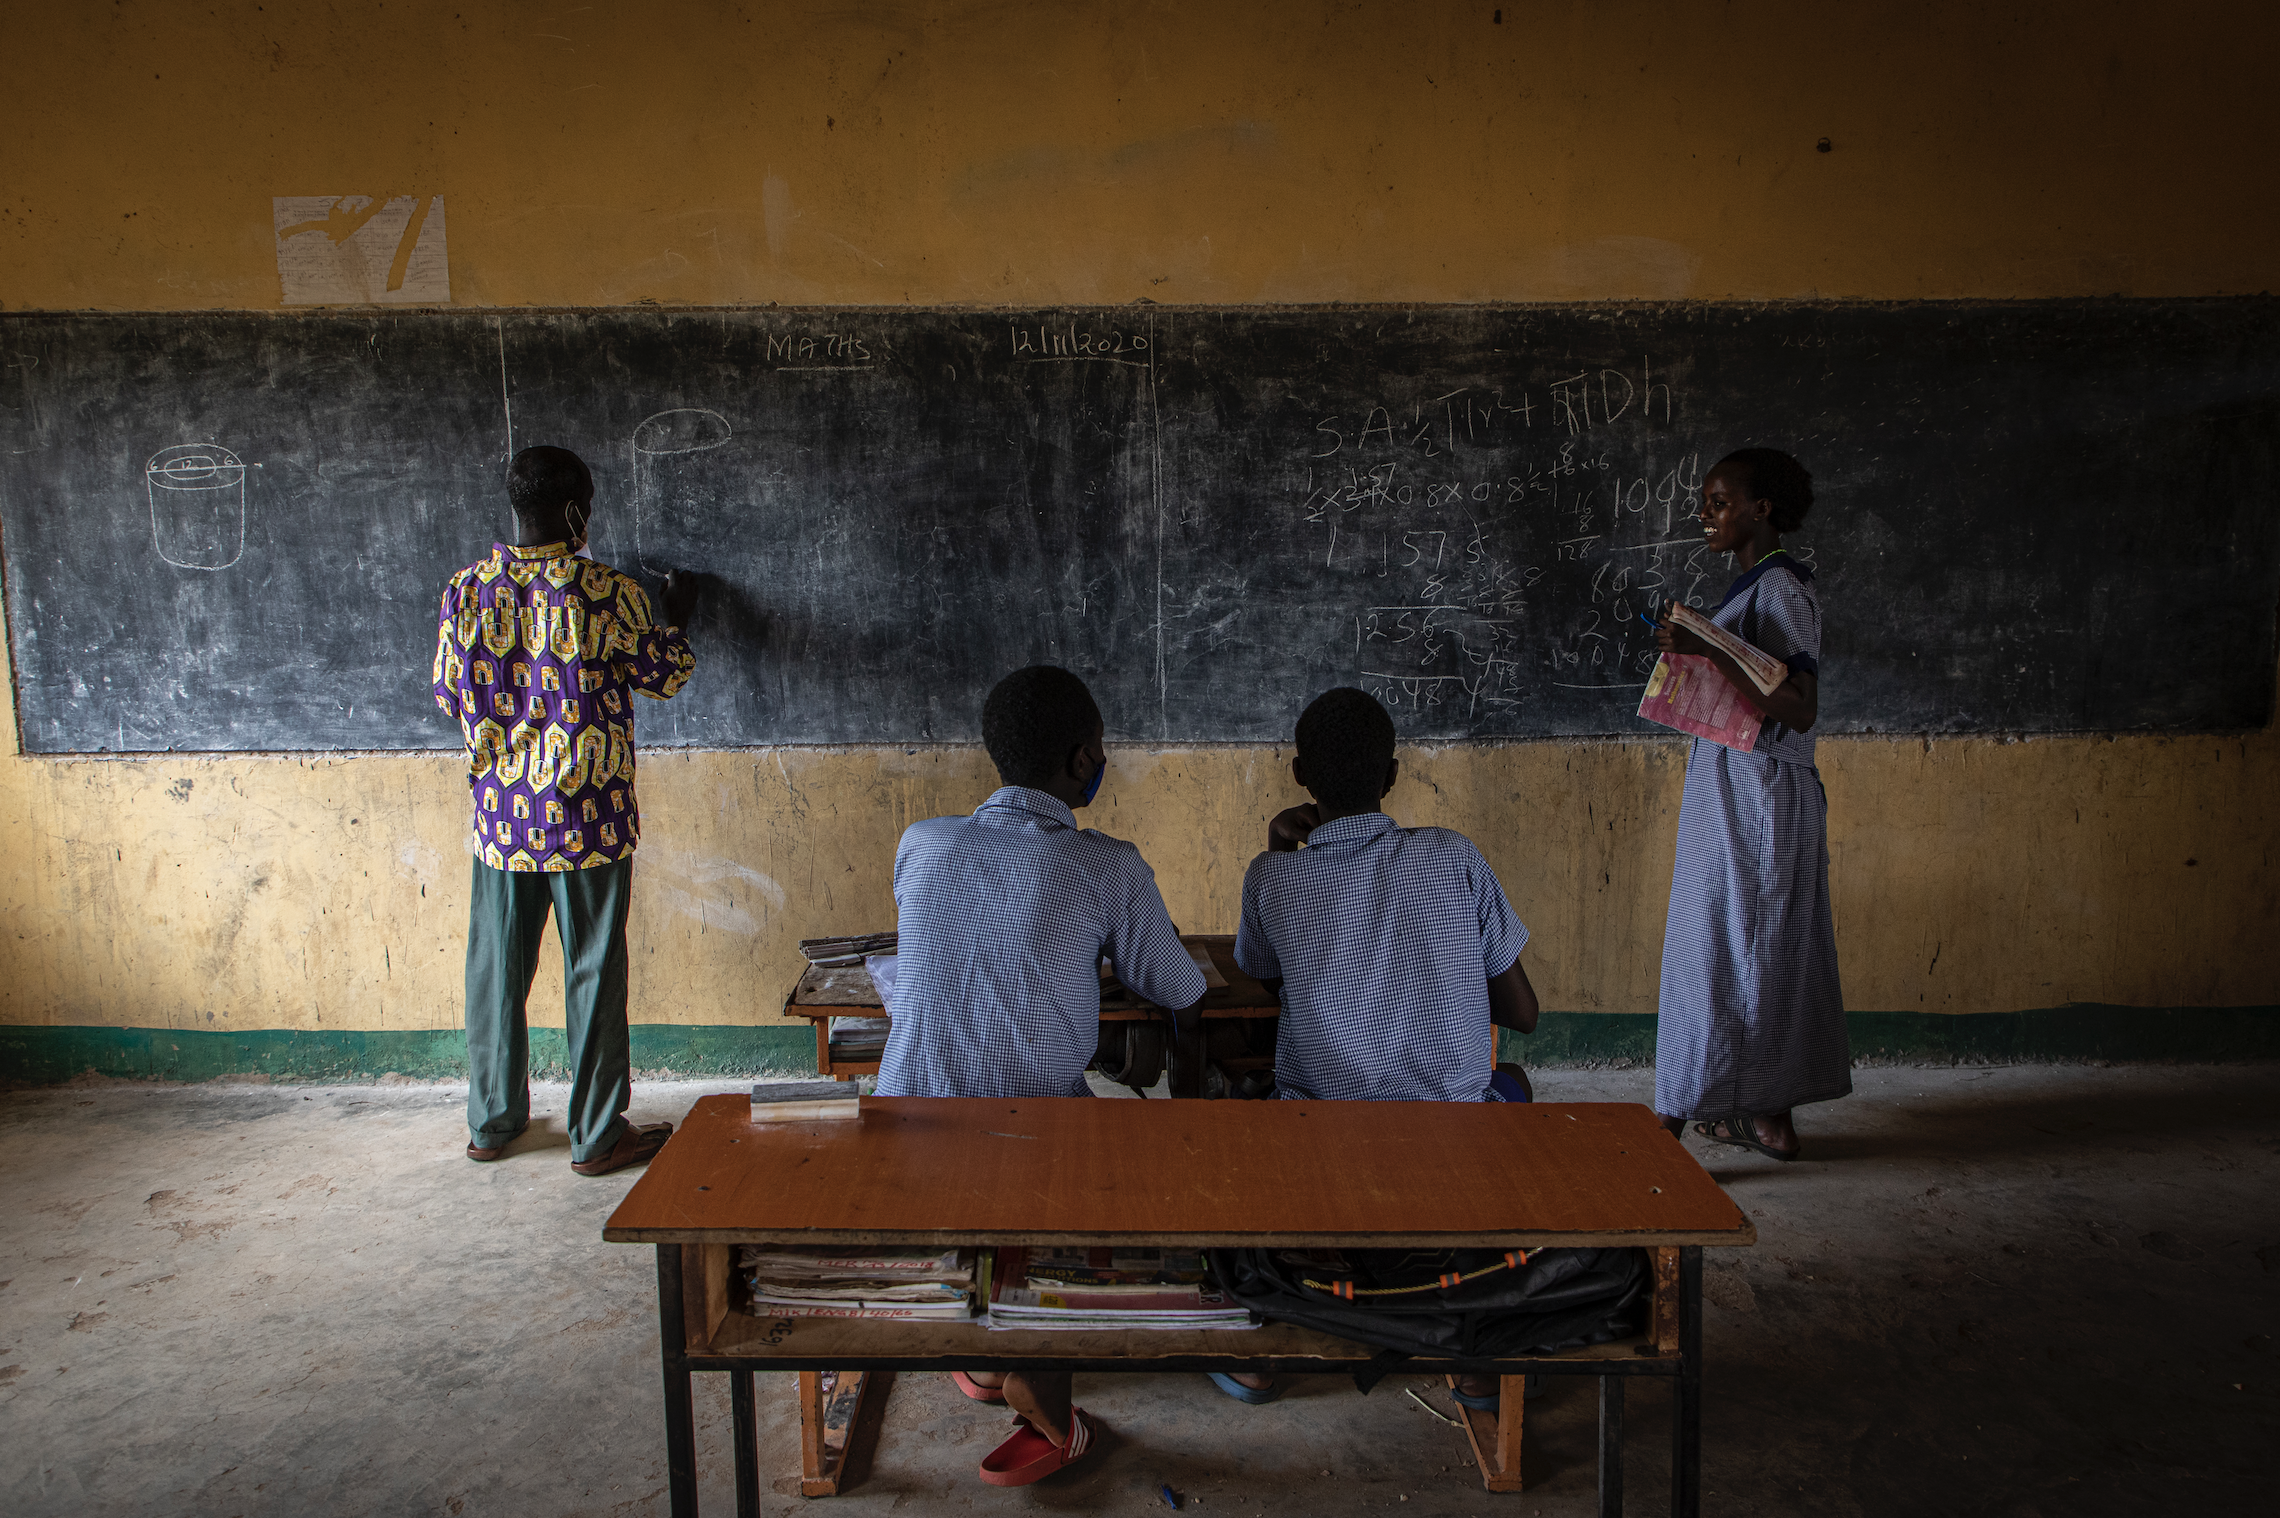 Edward Lekapana, left, teaches at a school in Laisamis, Kenya. “Some come back. They don’t concentrate the way they were concentrating before. There are some who are married off. Those who are do not return to school after they're married,” he said. Image by Will Swanson. Kenya, 2020.